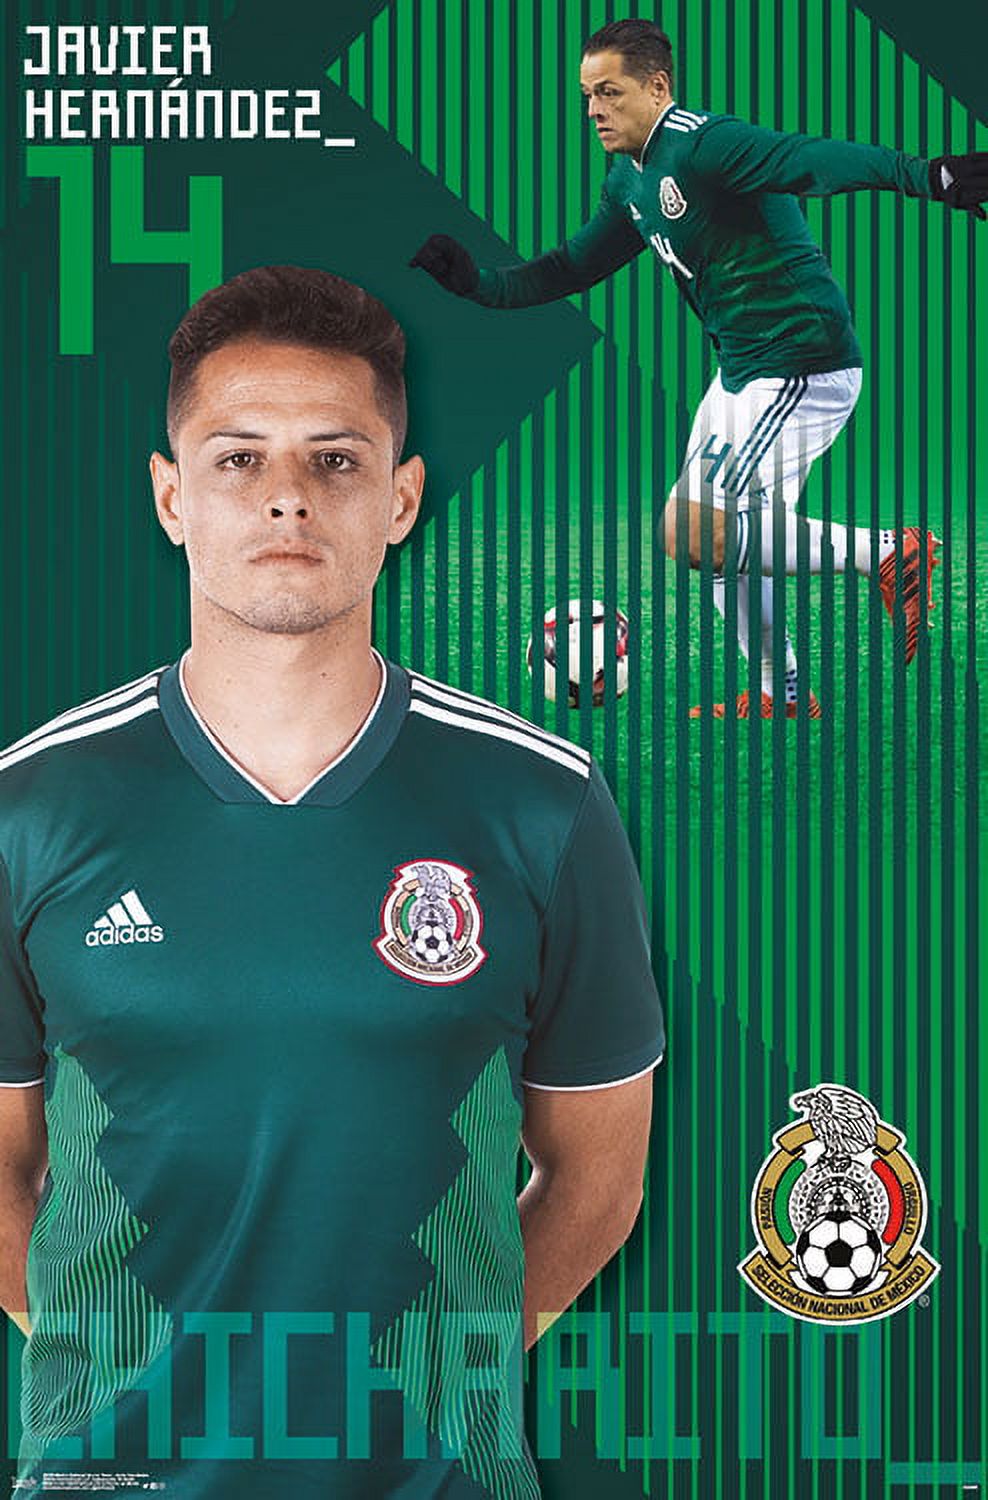 Mexico National Soccer Team - Javier Hernández - image 1 of 1